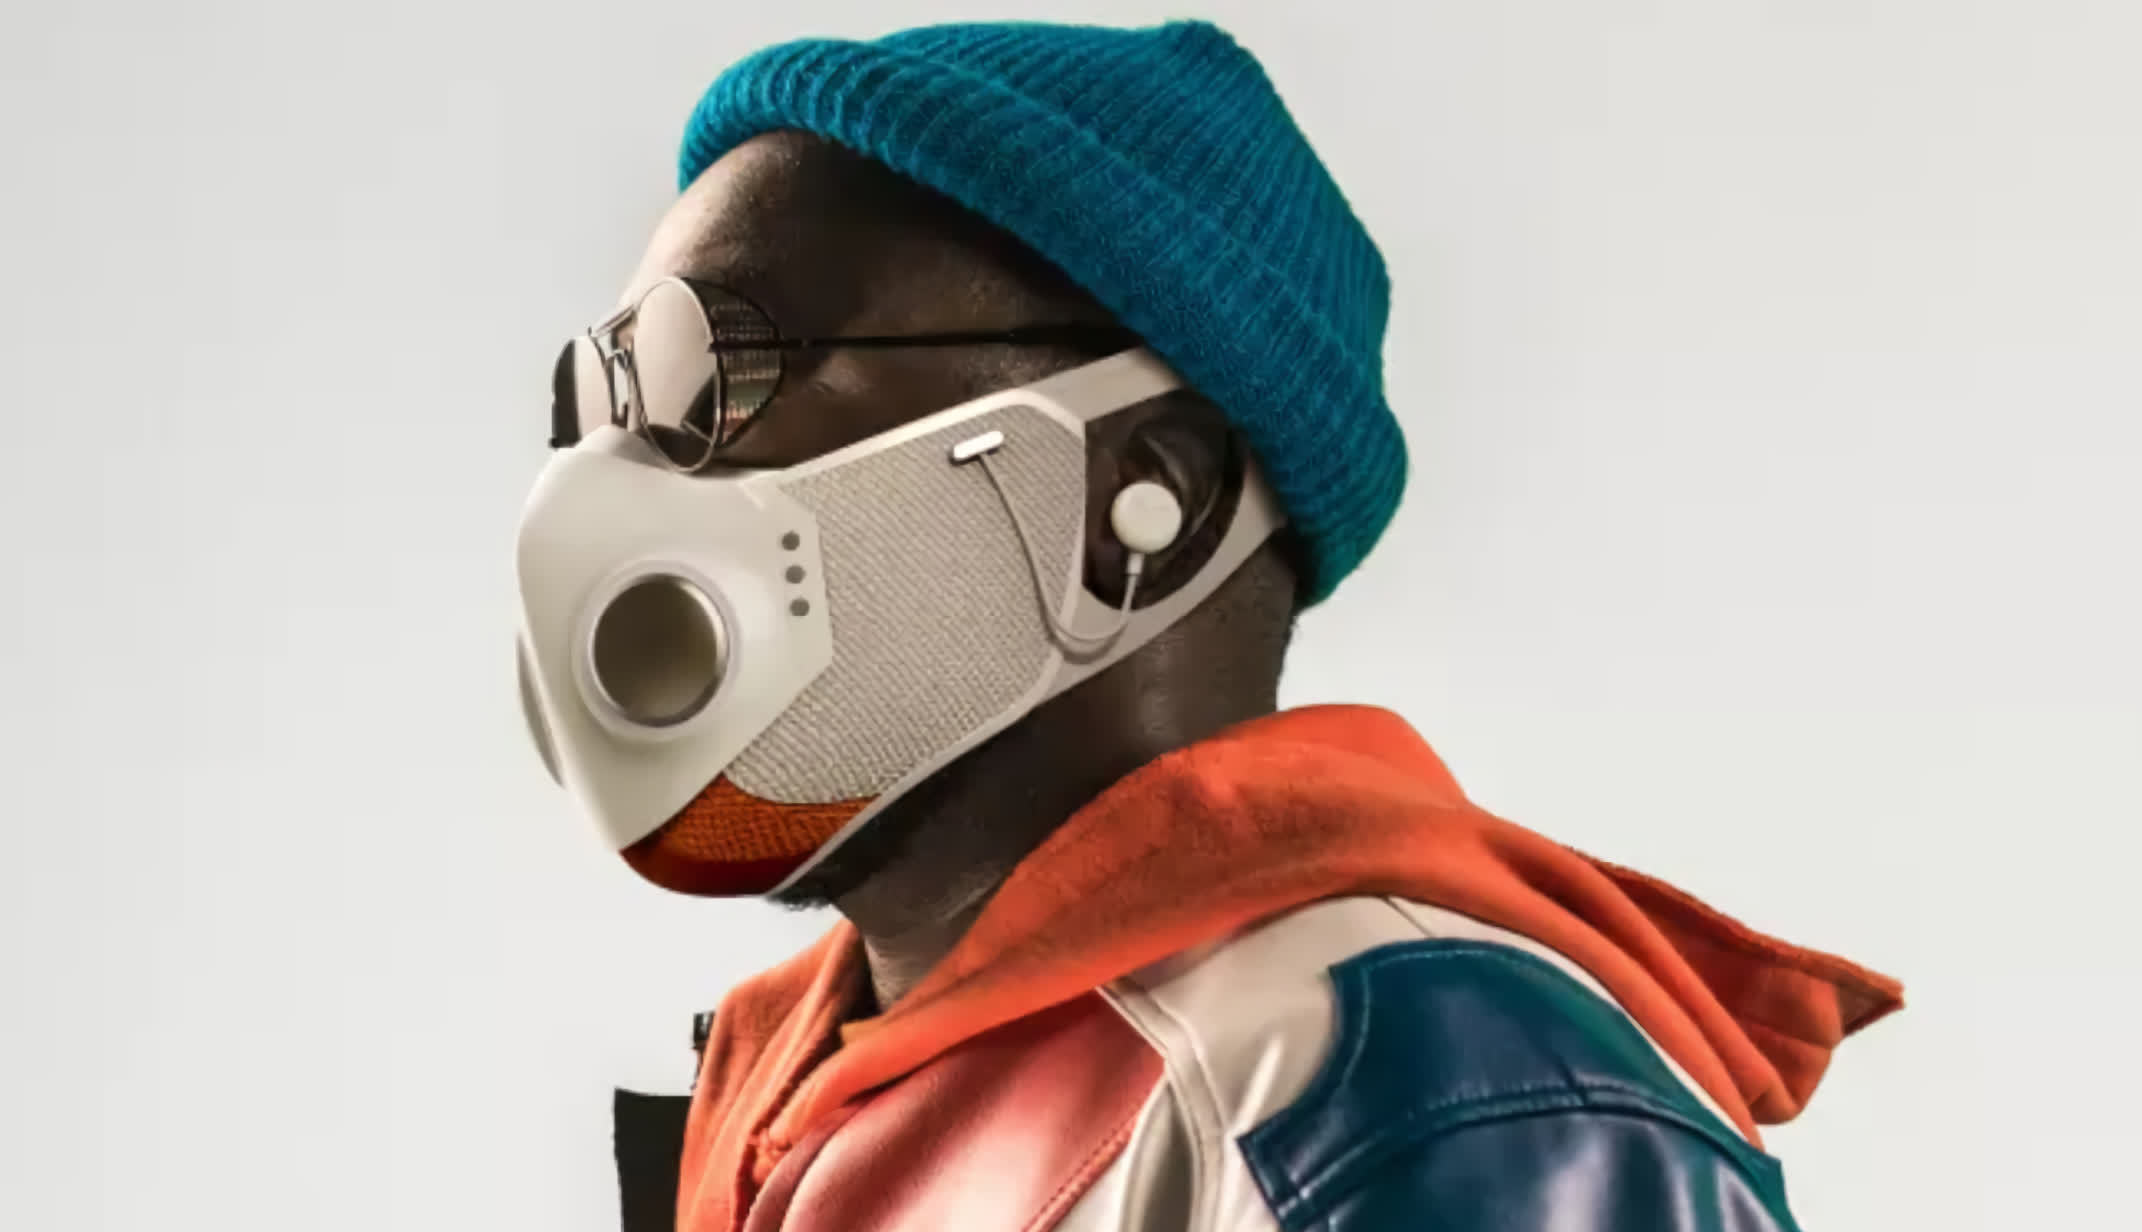 Will.i.am reveals his $299 face mask featuring dual fans, ANC headphones, Bluetooth, and more